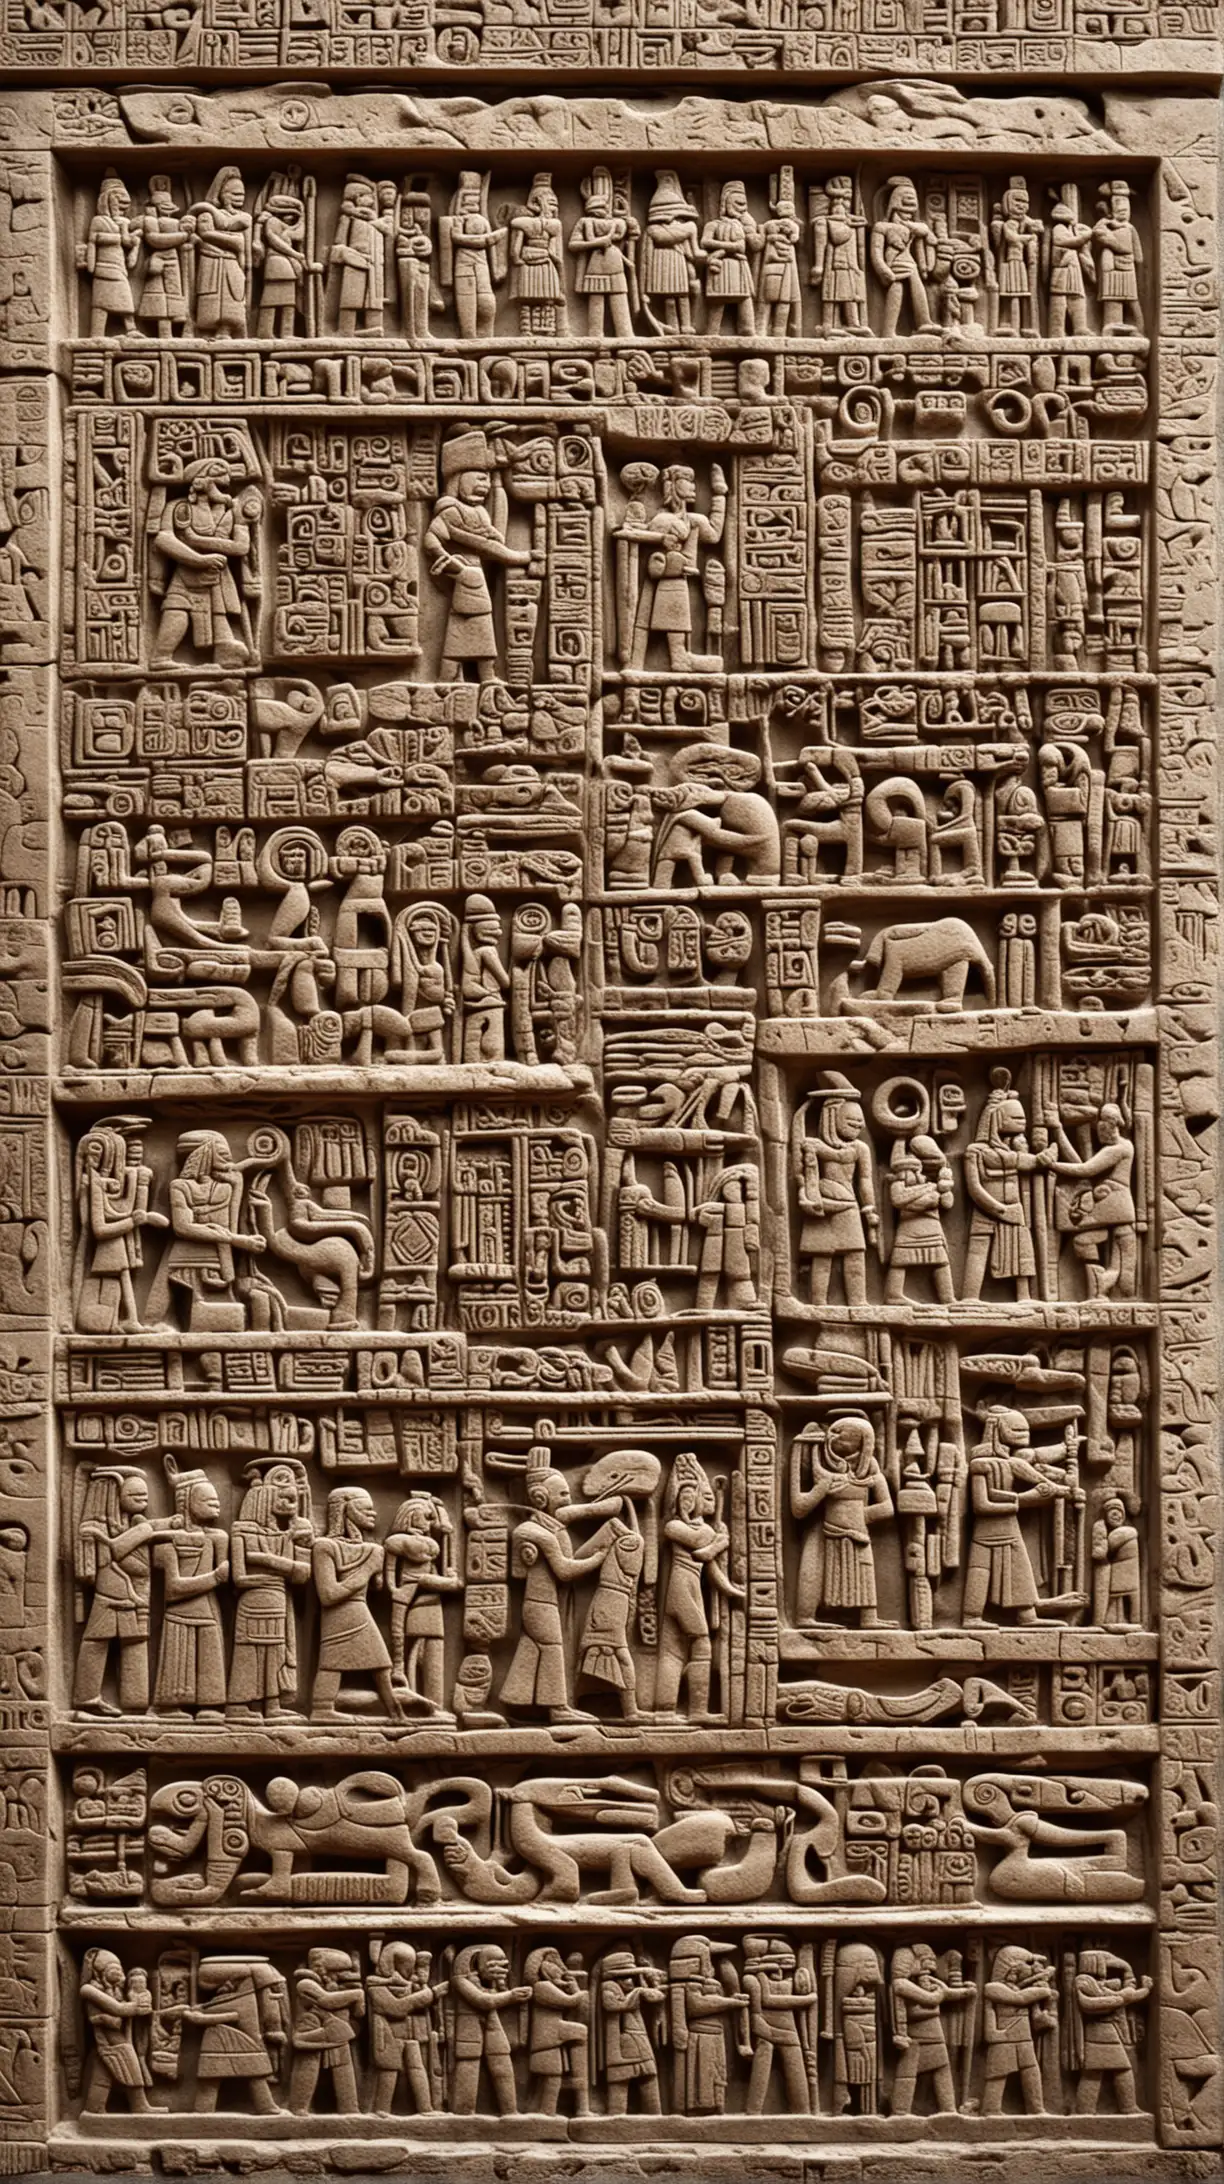 A close-up of intricately carved Maya glyphs and hieroglyphs, etched into the weathered surface of a stone stela. Hyper realistic